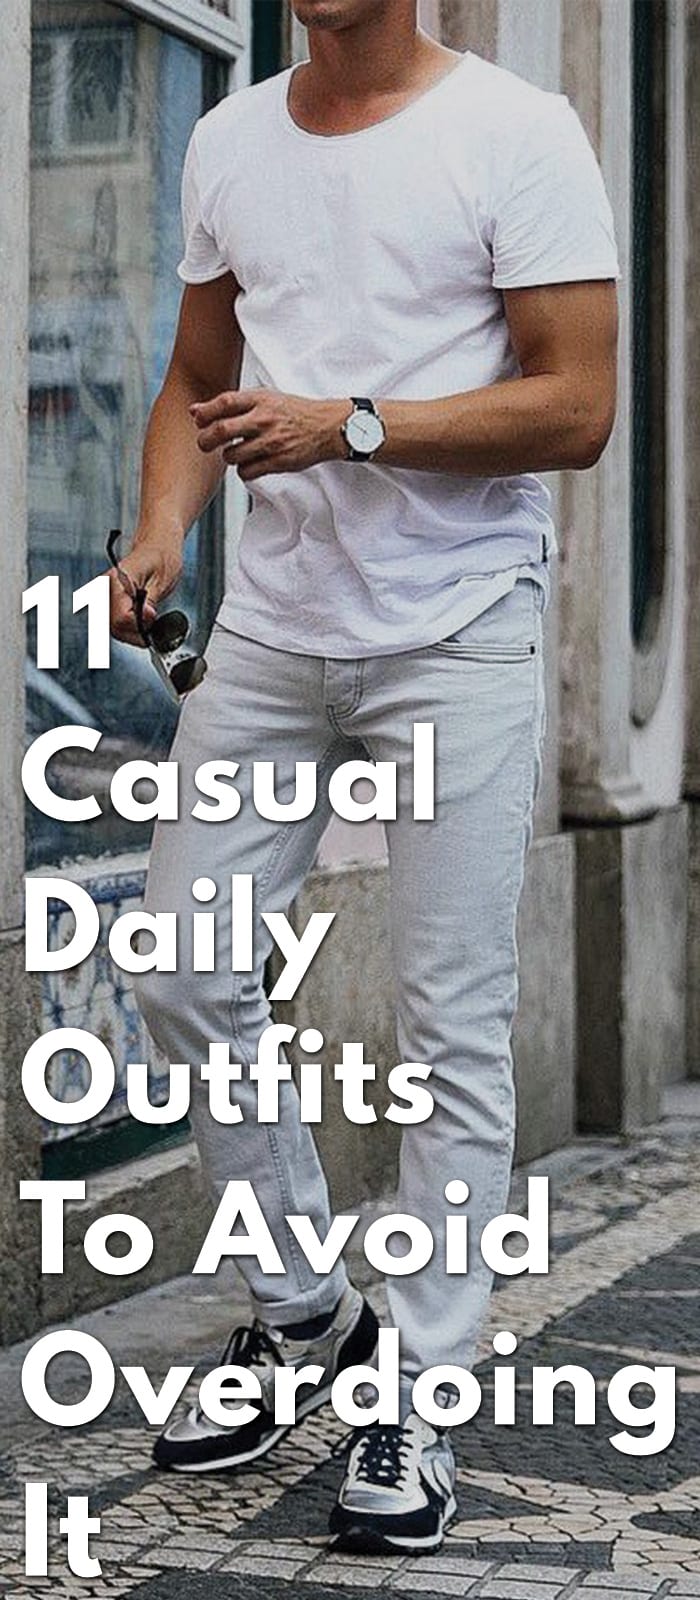 11-Casual-Daily-Outfits-To-Avoid-Overdoing-It